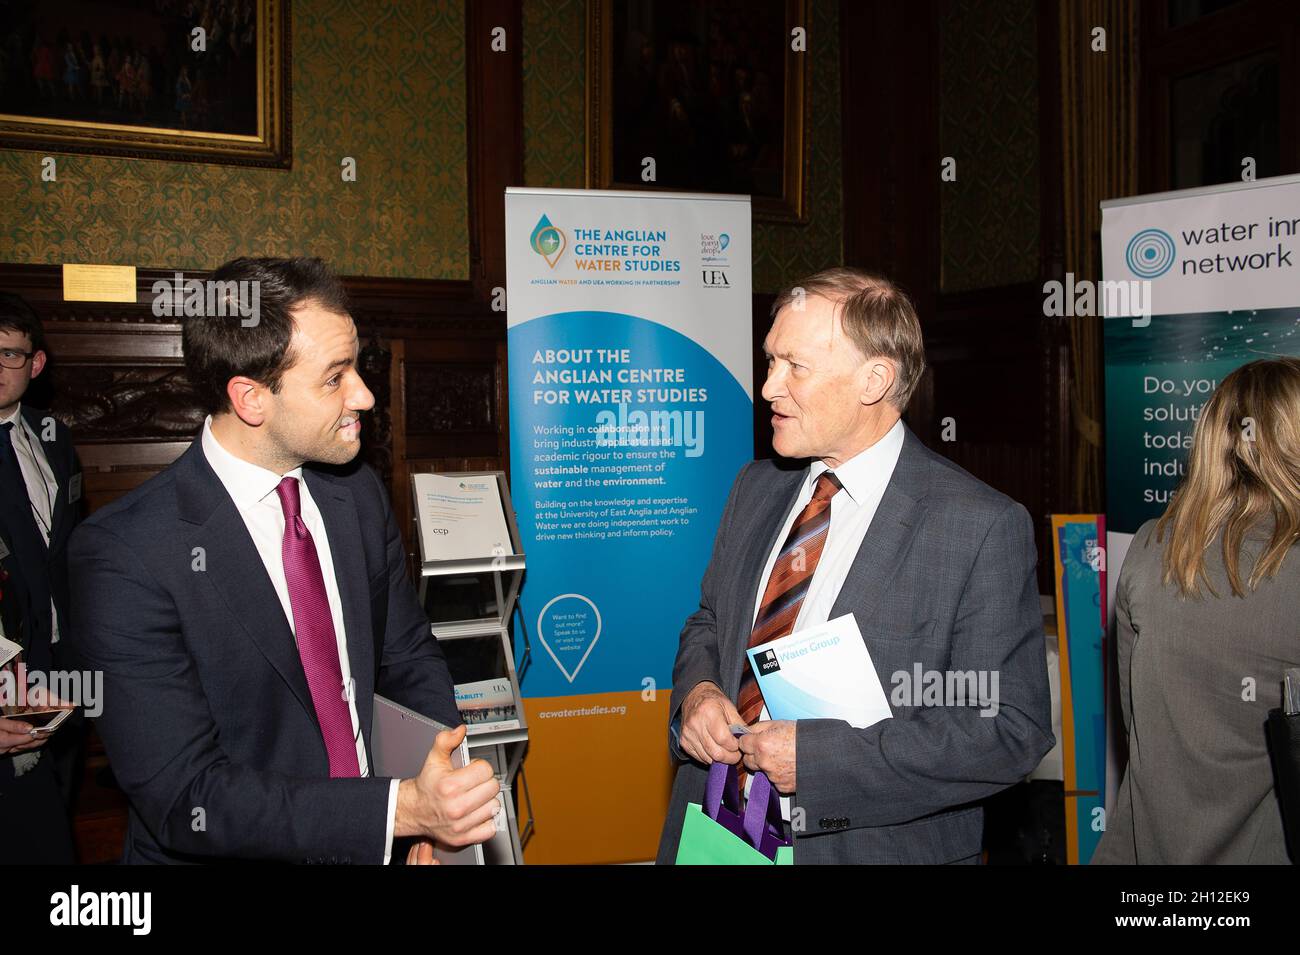 London, UK. 28th November, 2017. Sir David Amess MP for Southend West attends an All Party Parliamentary Water Group Innovation Reception at the House of Commons. Obituary: Sir David was tragically stabbed to death in his constituency on Friday 15th October 2021. Sir David had been an MP since 1983. Credit: Maureen McLean/Alamy Stock Photo